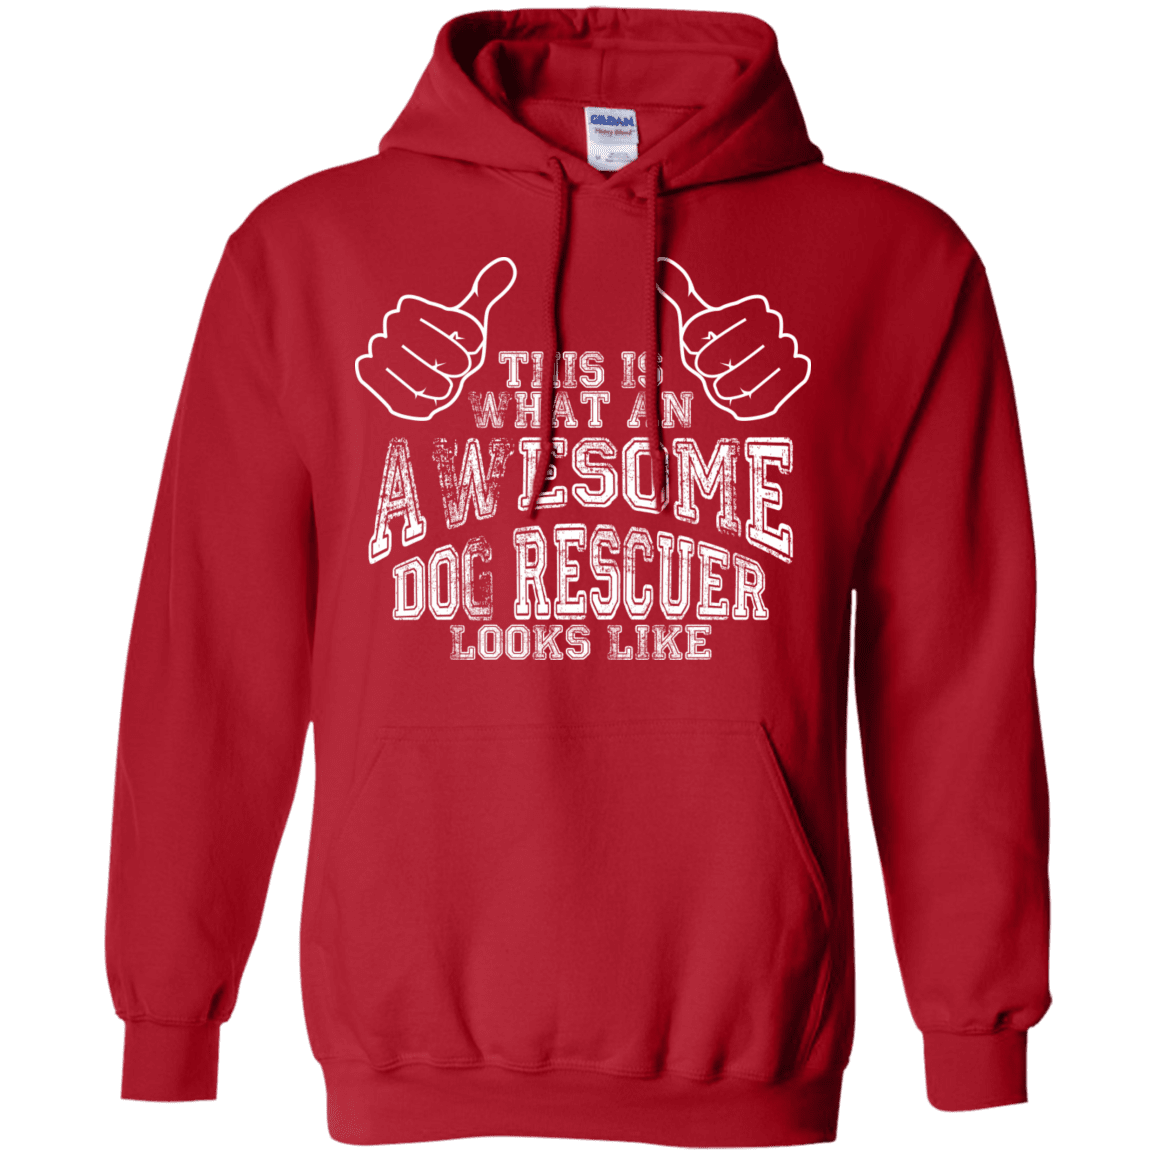 Awesome Dog Rescuer - Hoodie.